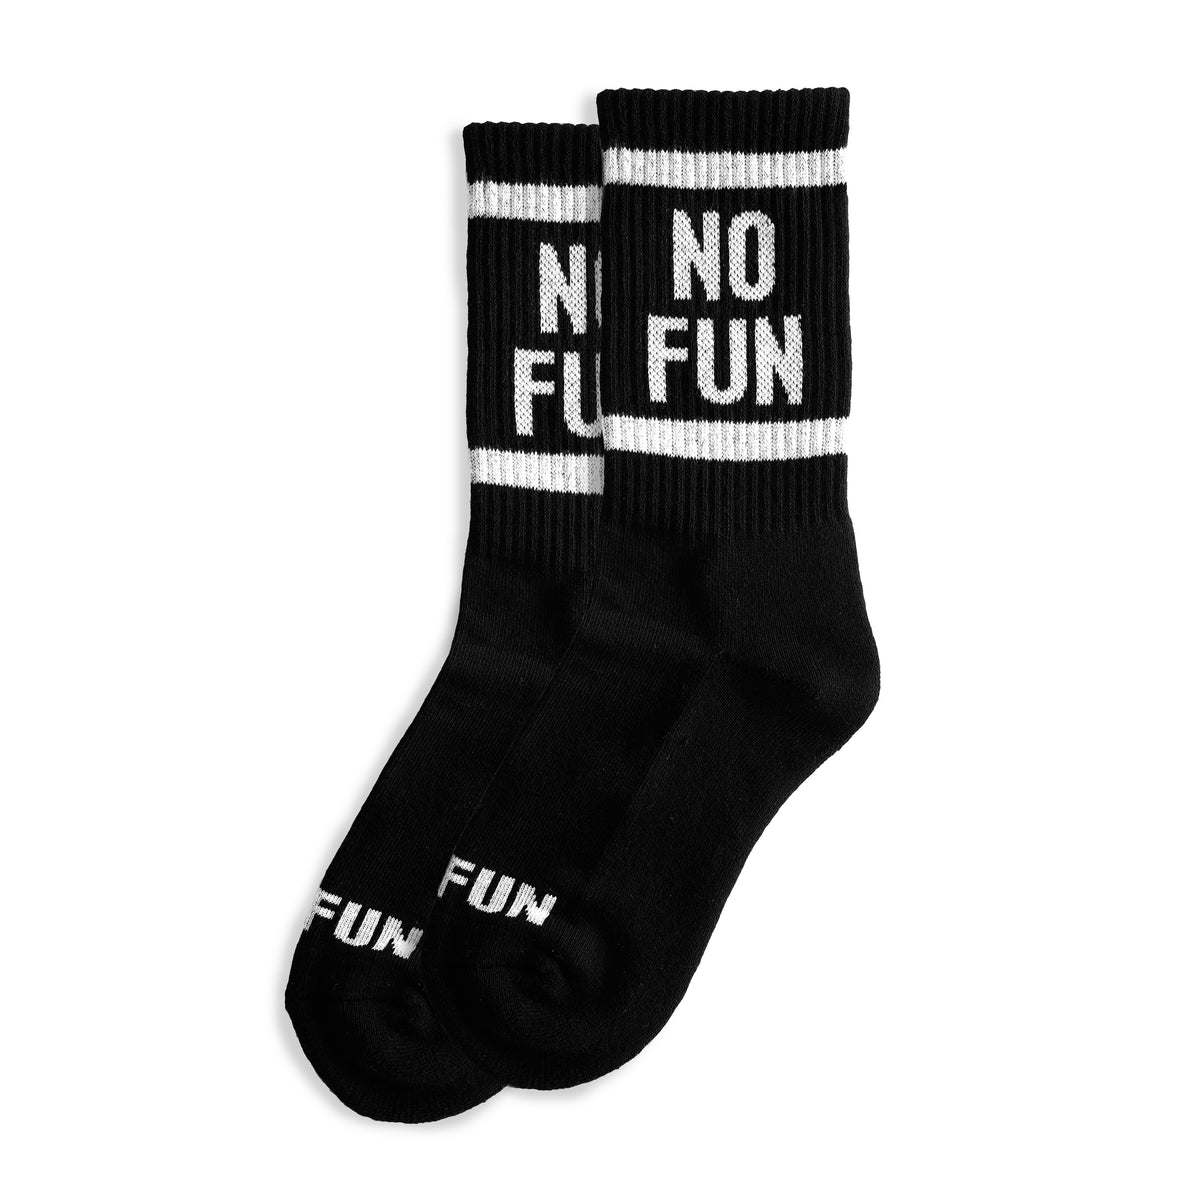 "No Fun®" Socks by No Fun®. Crewneck hight socks are black, with black heel and toe cap. The phrase "No Fun®" is woven in white into the leg of the sock. There is a white band found above, and below the "No Fun®" text. "No Fun®" is woven in white, just above the black toecap on the top.